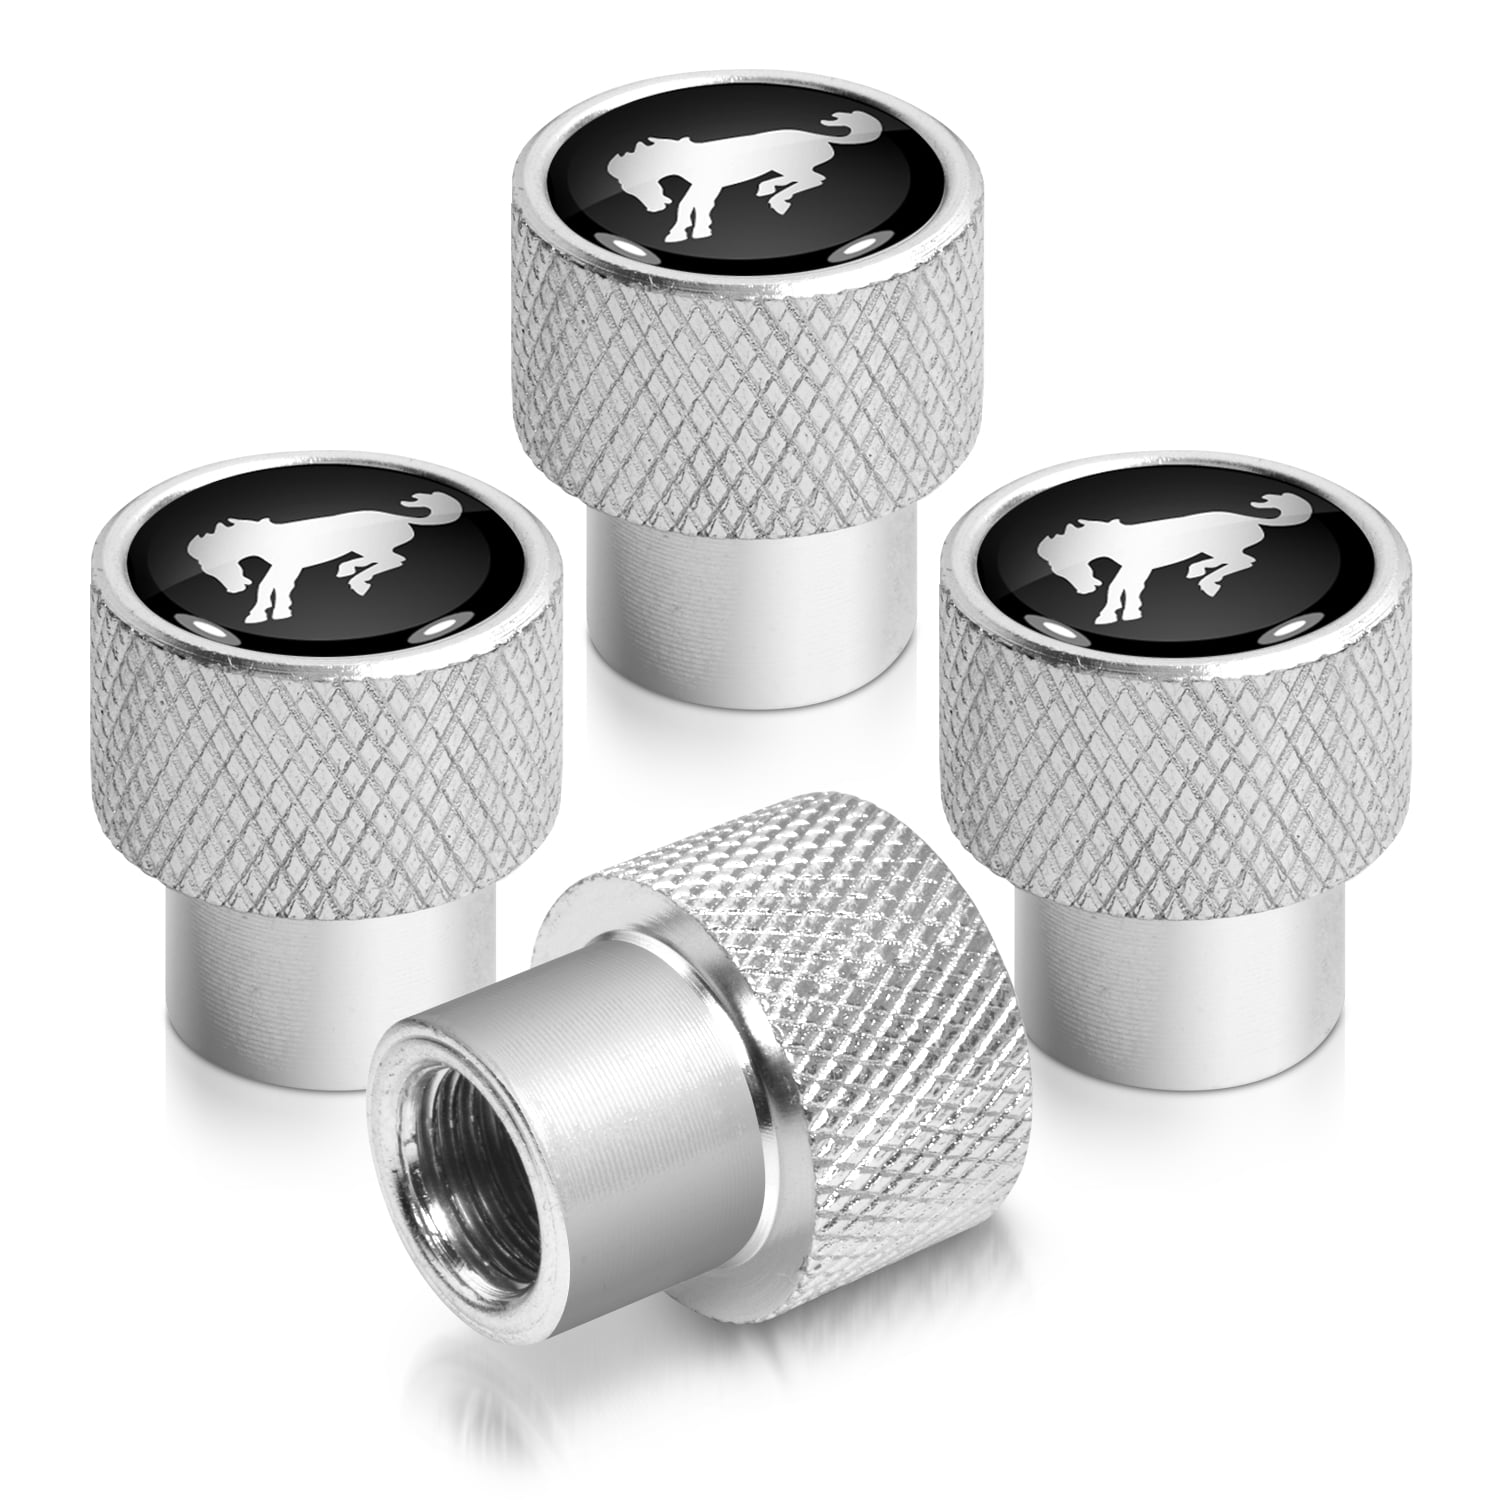 Ford Bronco ABS Plastic Chrome Valve Stem Cap Covers Pack of 5 